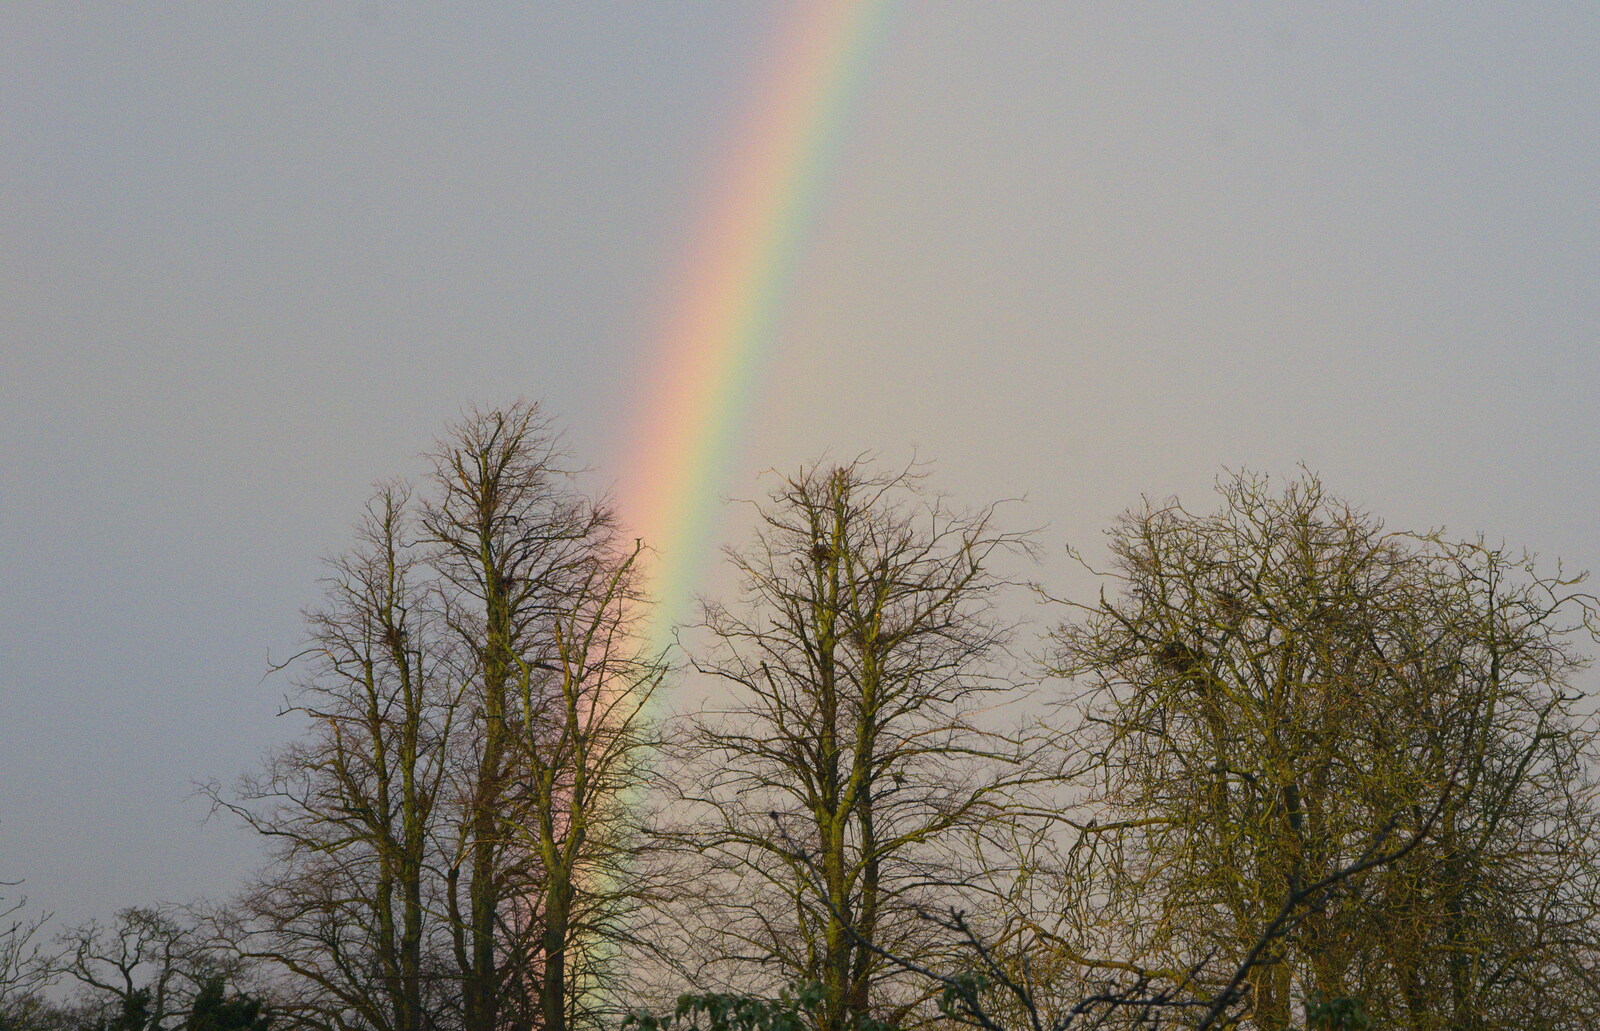 There's a rtainbow over the Oaksmere from The BBs do a Recording, Hethel, Norfolk - 18th January 2015